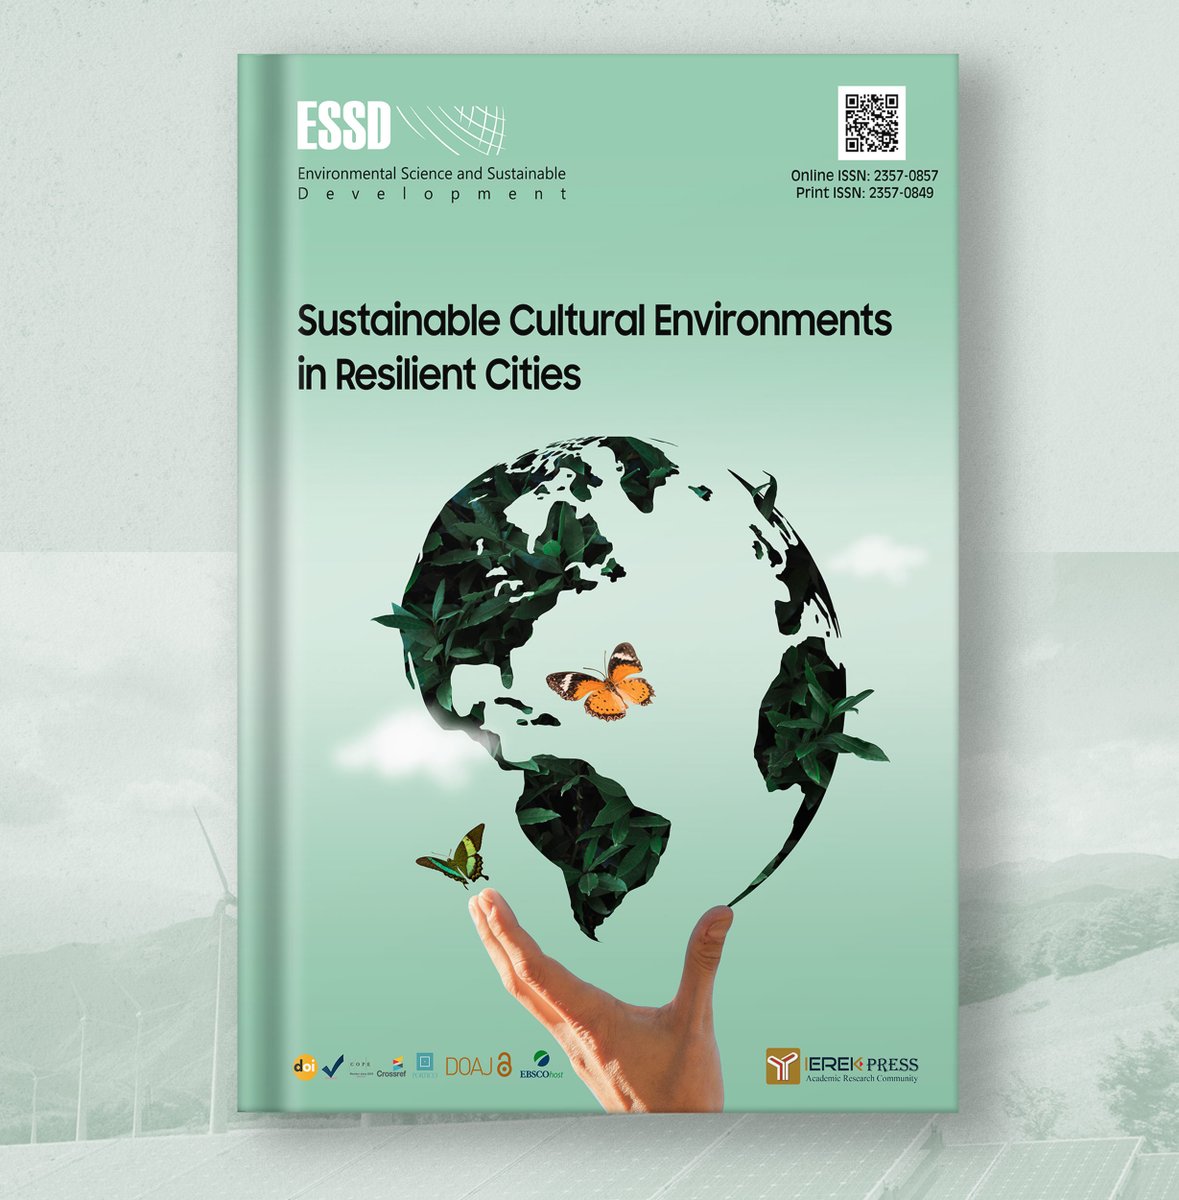 To all researchers, the 1st issue of our 8volume of #ESSD journal has just been published! This issue has something for everyone. And with contributions from some of the leading minds in Sustainability, you won’t want to miss out. Download your copy today! press.ierek.com/index.php/ESSD…